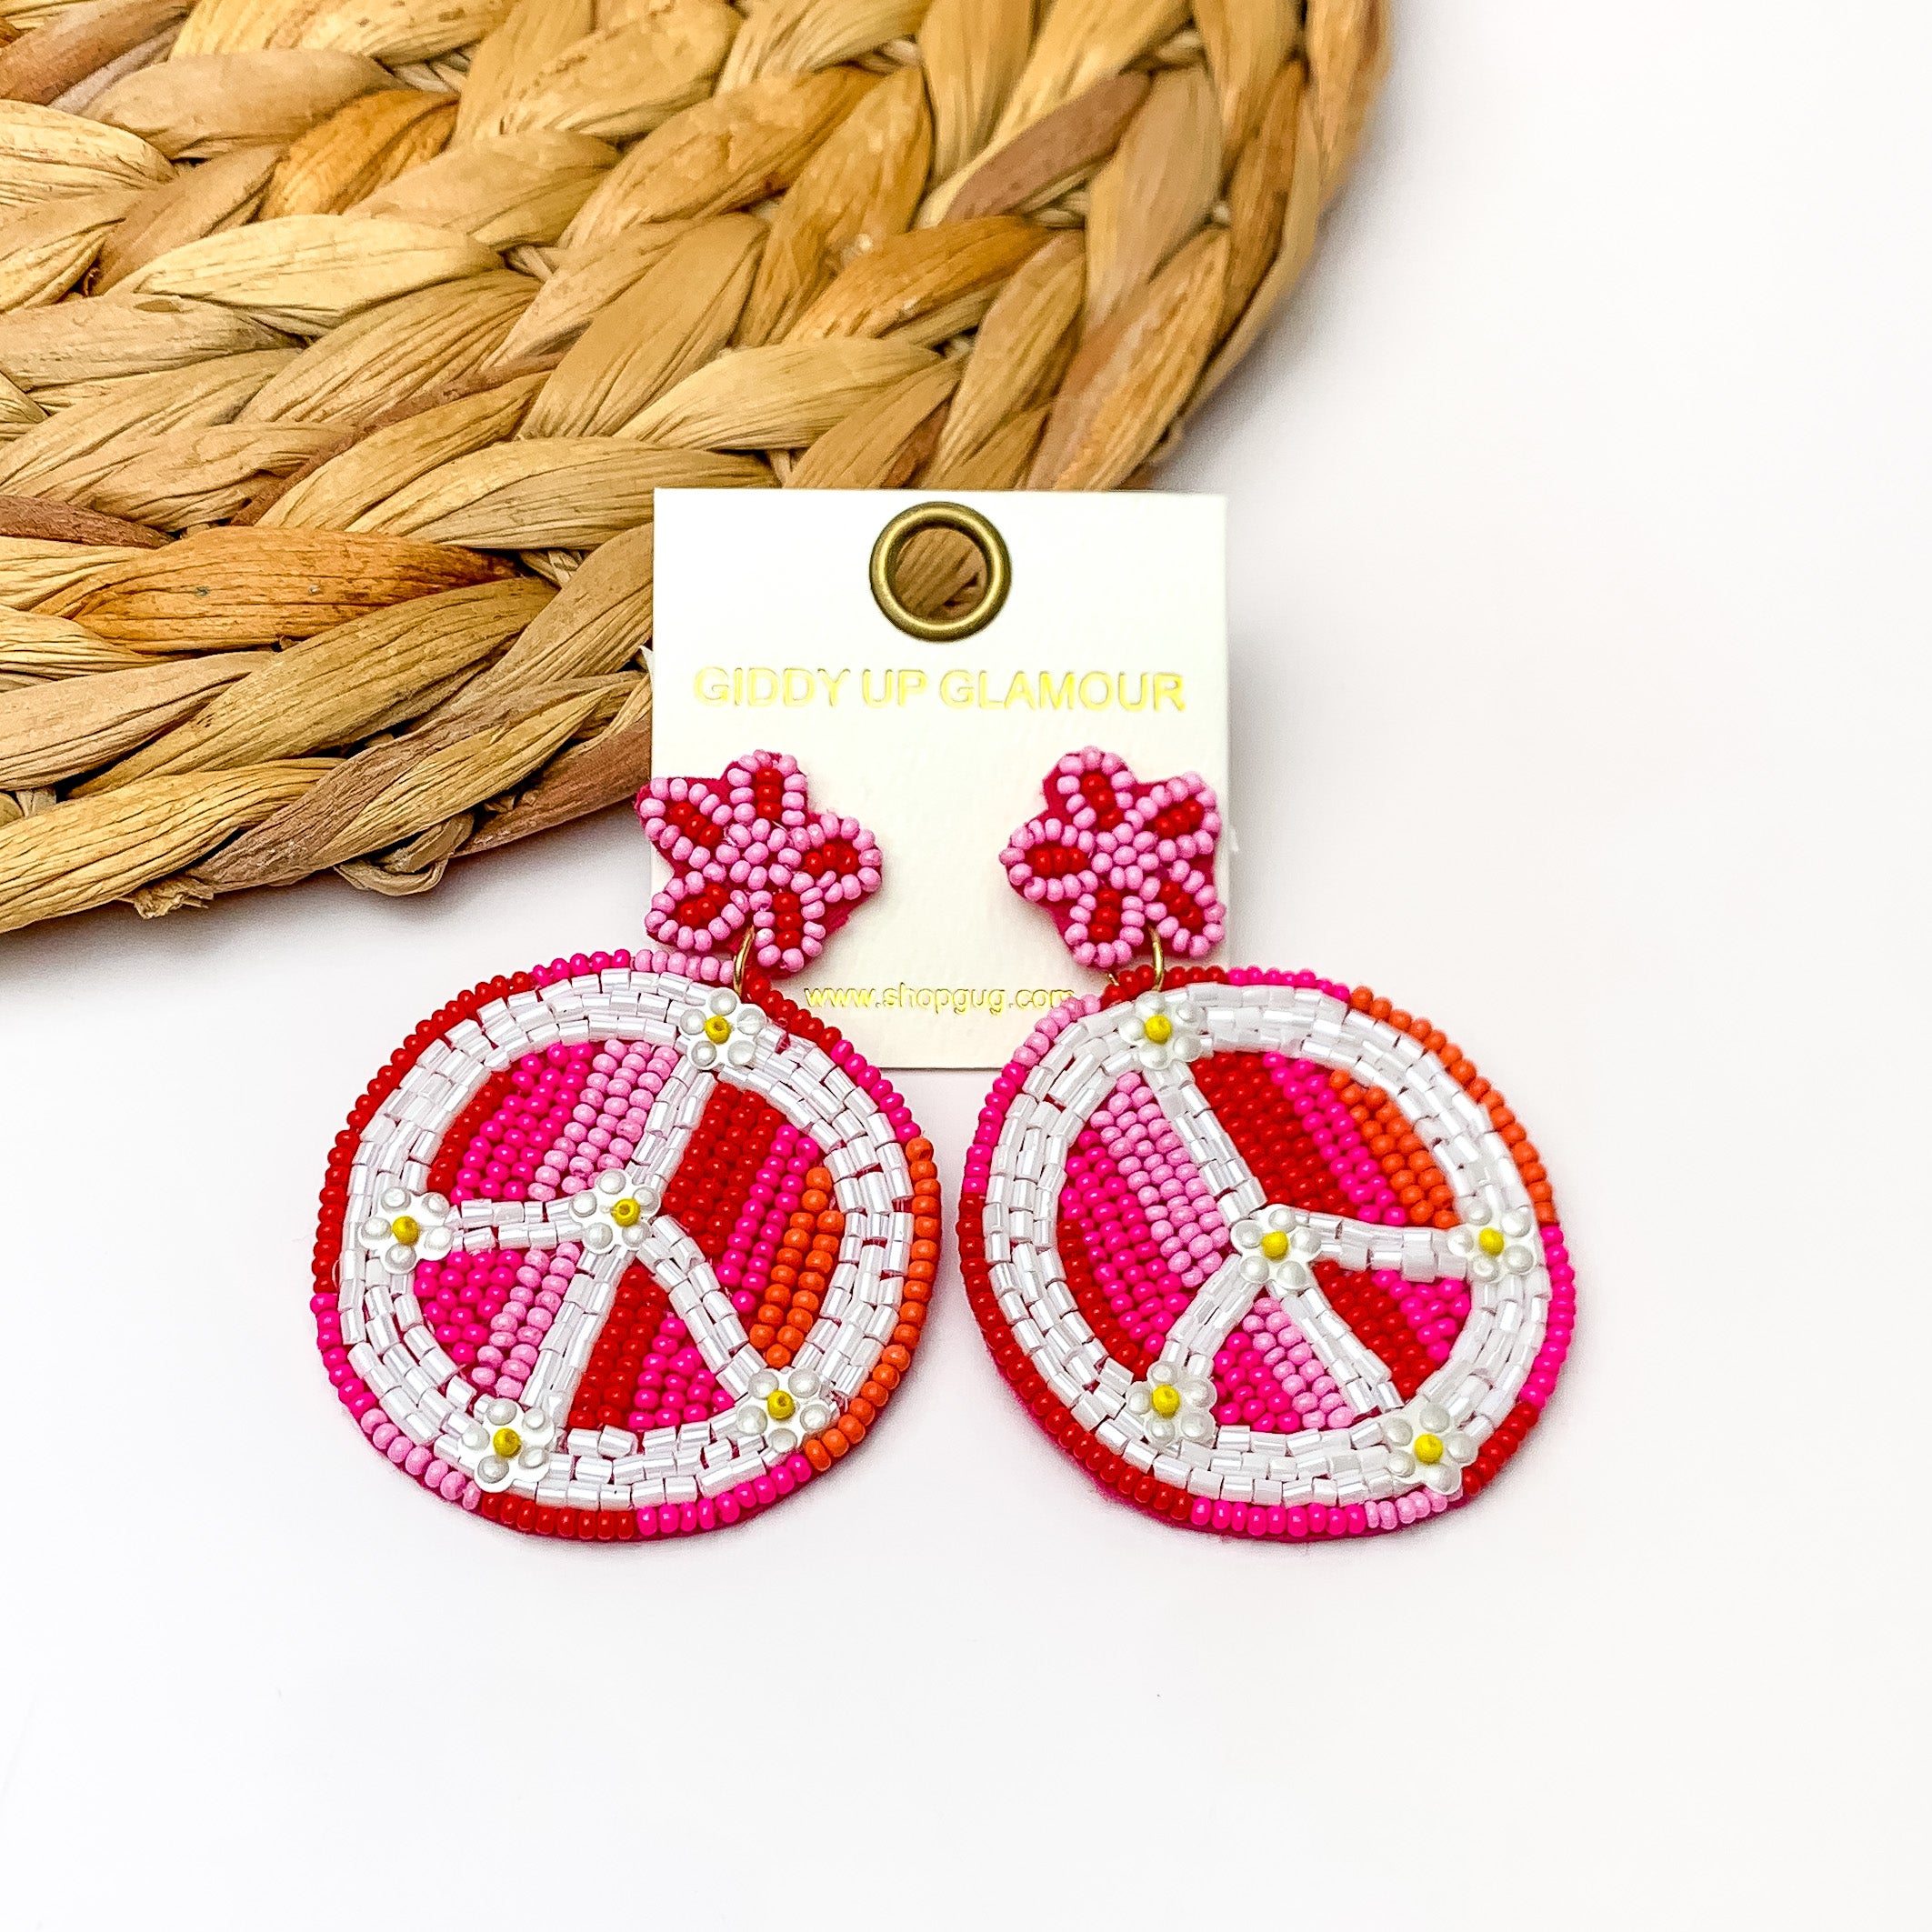 Beaded Peace sign Earrings With Star Post in Fuchsia. Pictured on a white background with a brown wood like decoration in the top left corner.